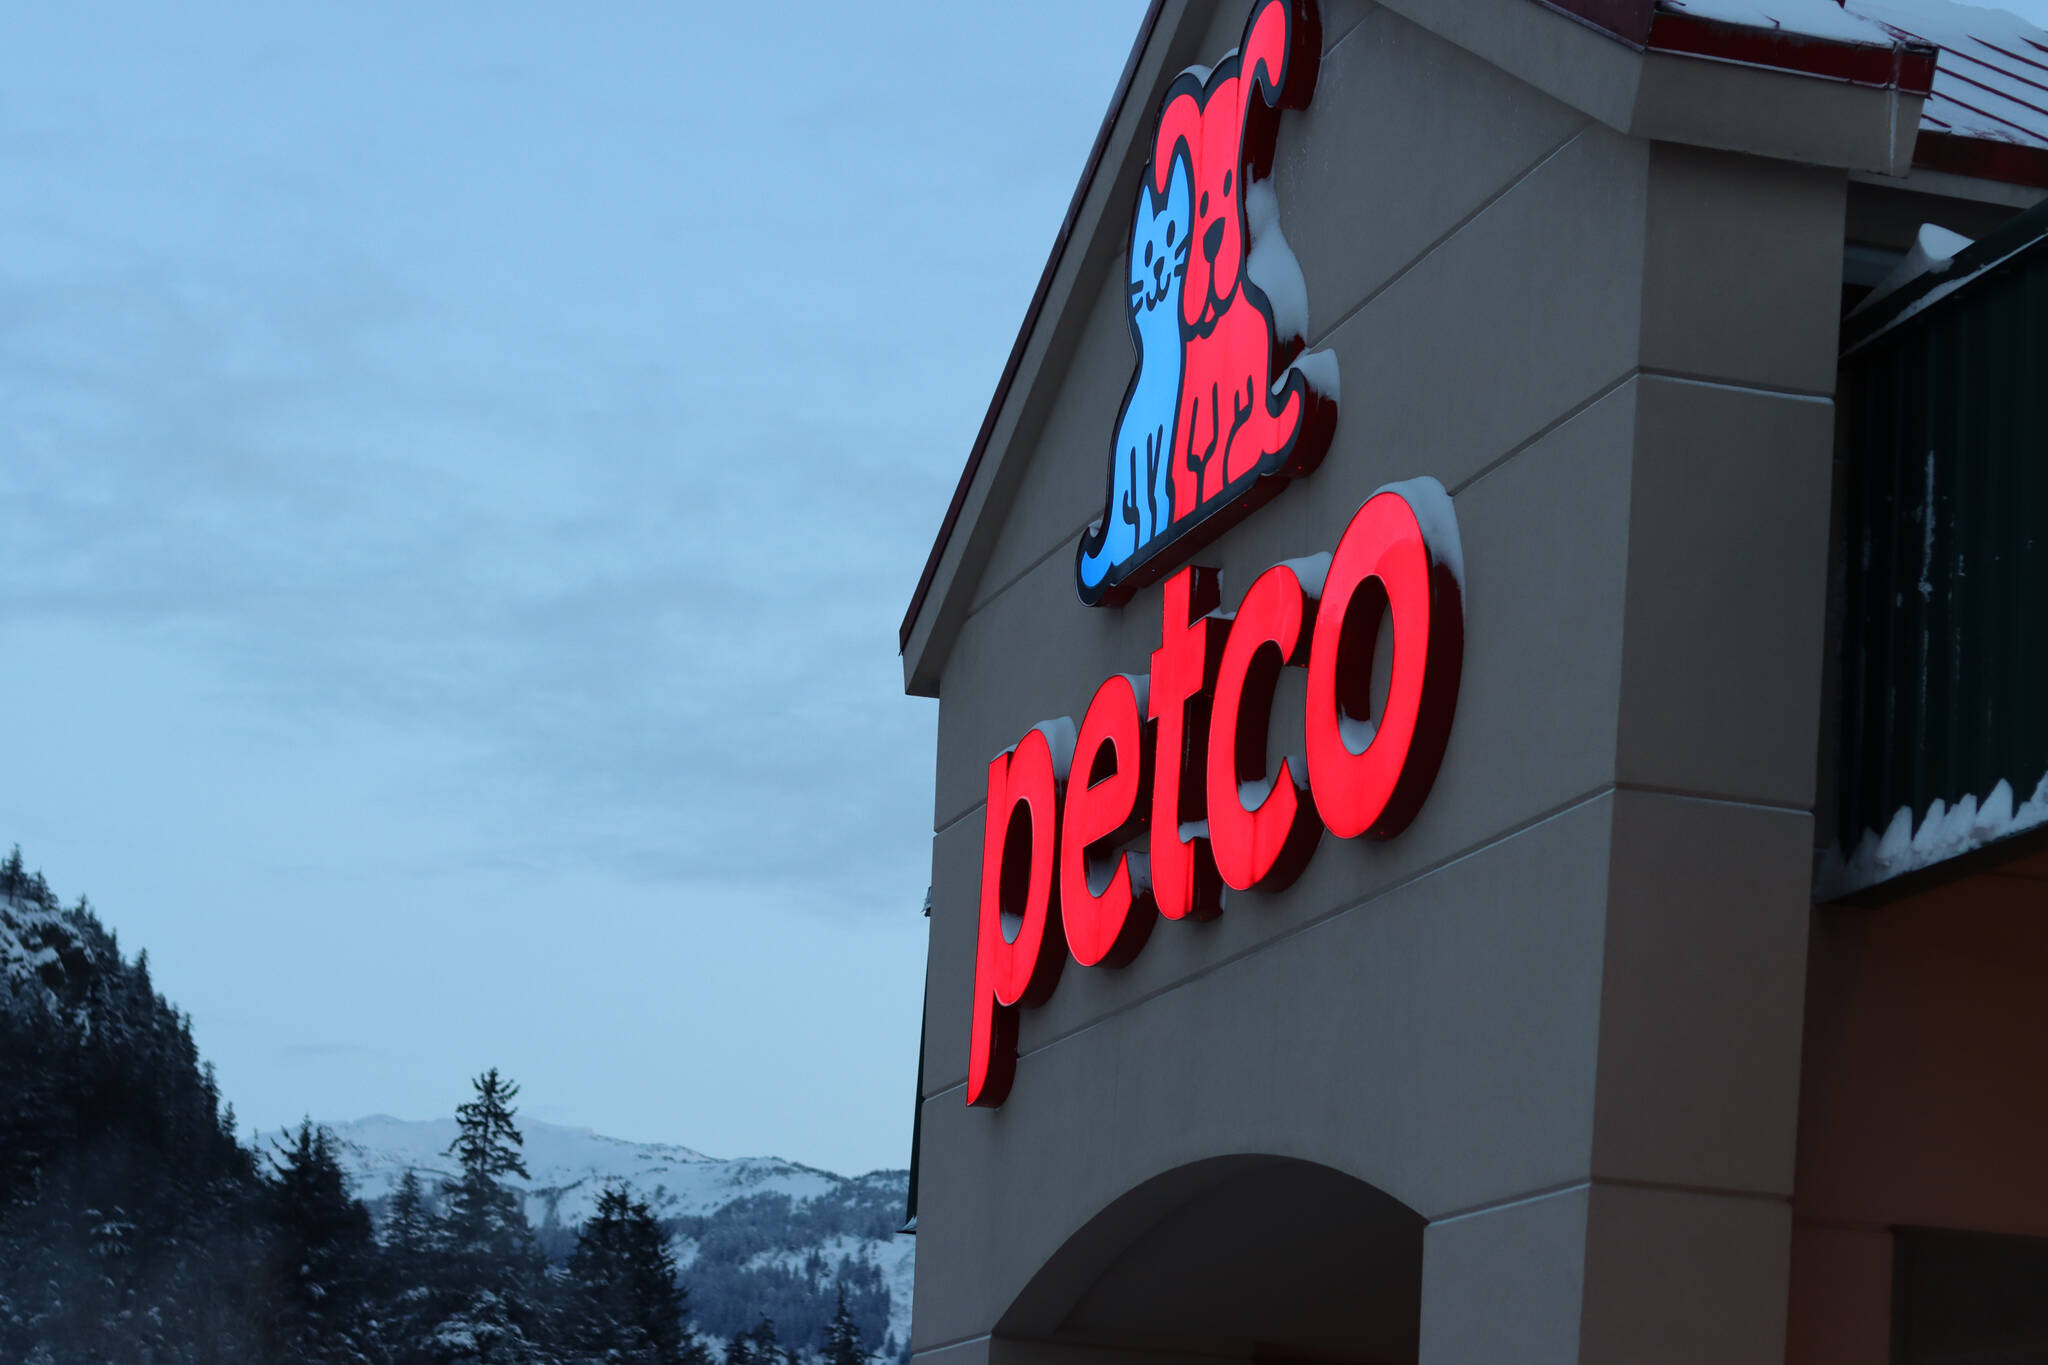 Petco had a small fire in a ceiling heating unit on Monday, Dec. 27, 2021, said a Capital City Fire/Rescue officer in a phone interview. (Ben Hohenstatt / Juneau Empire)